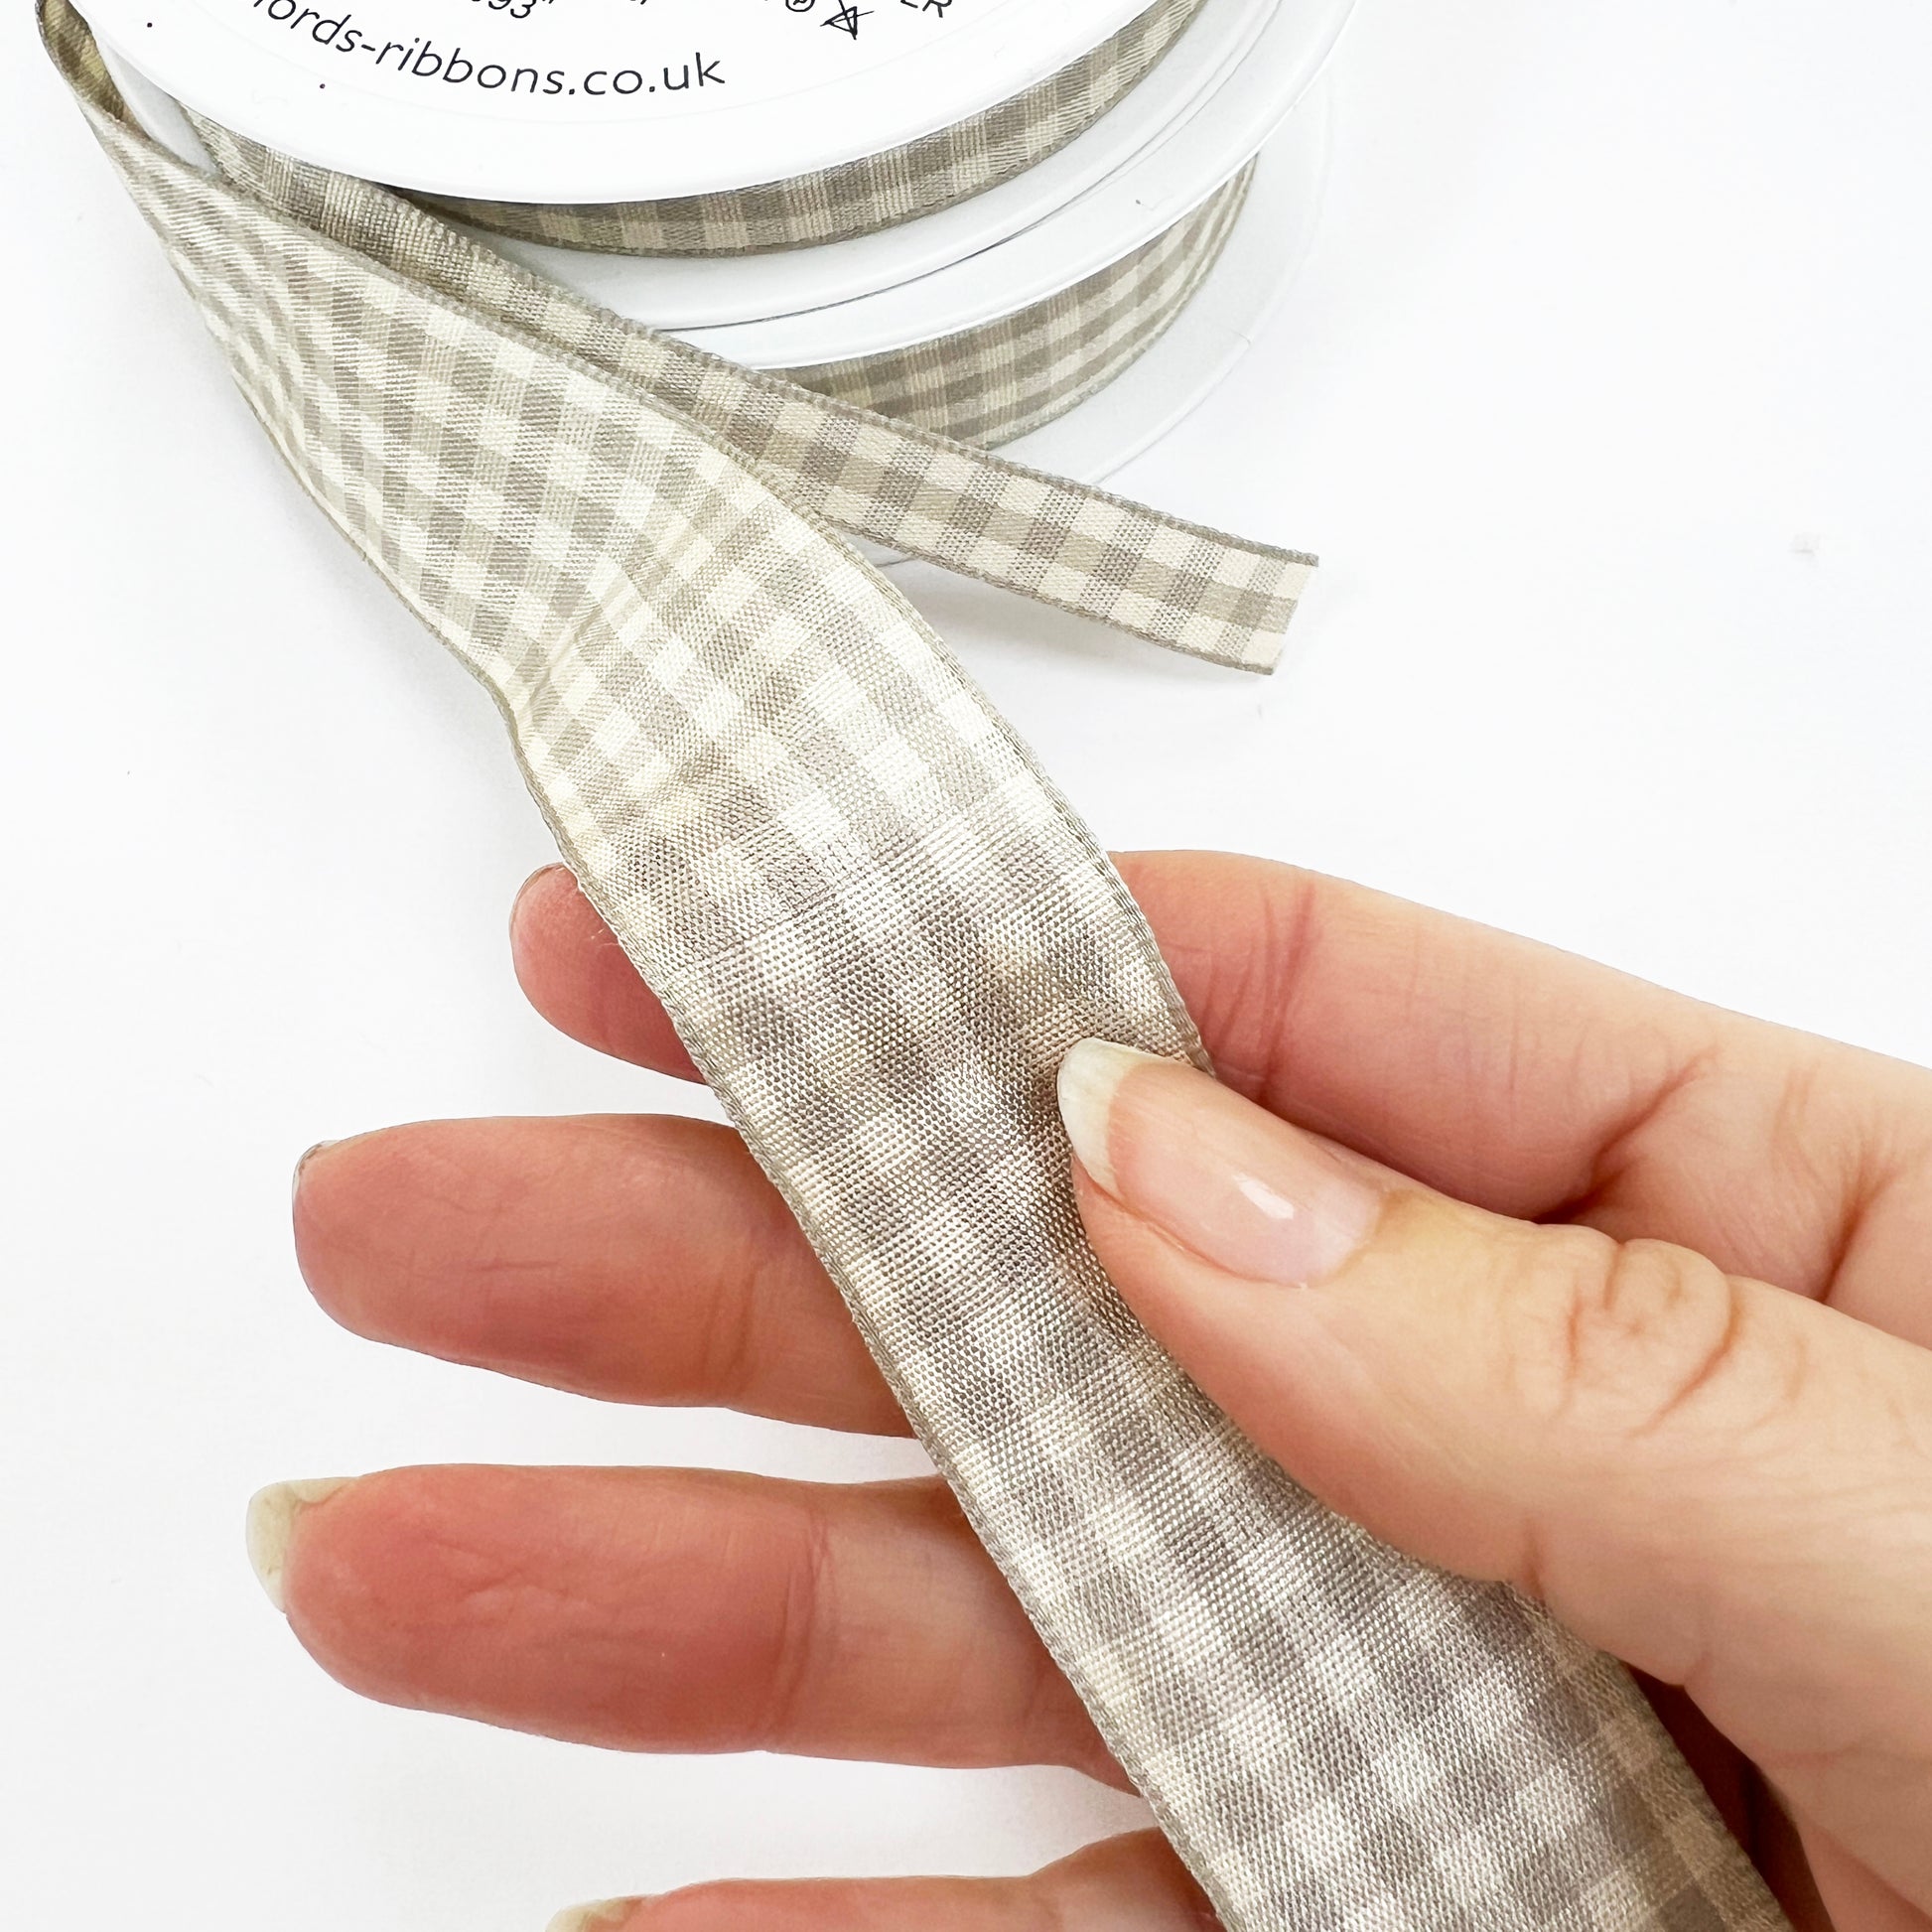 Warm Grey & Cream Gingham Ribbon | 10mm 15mm 25mm 1m Full 20m | Craft Wrapping Bows - SweetpeaStore